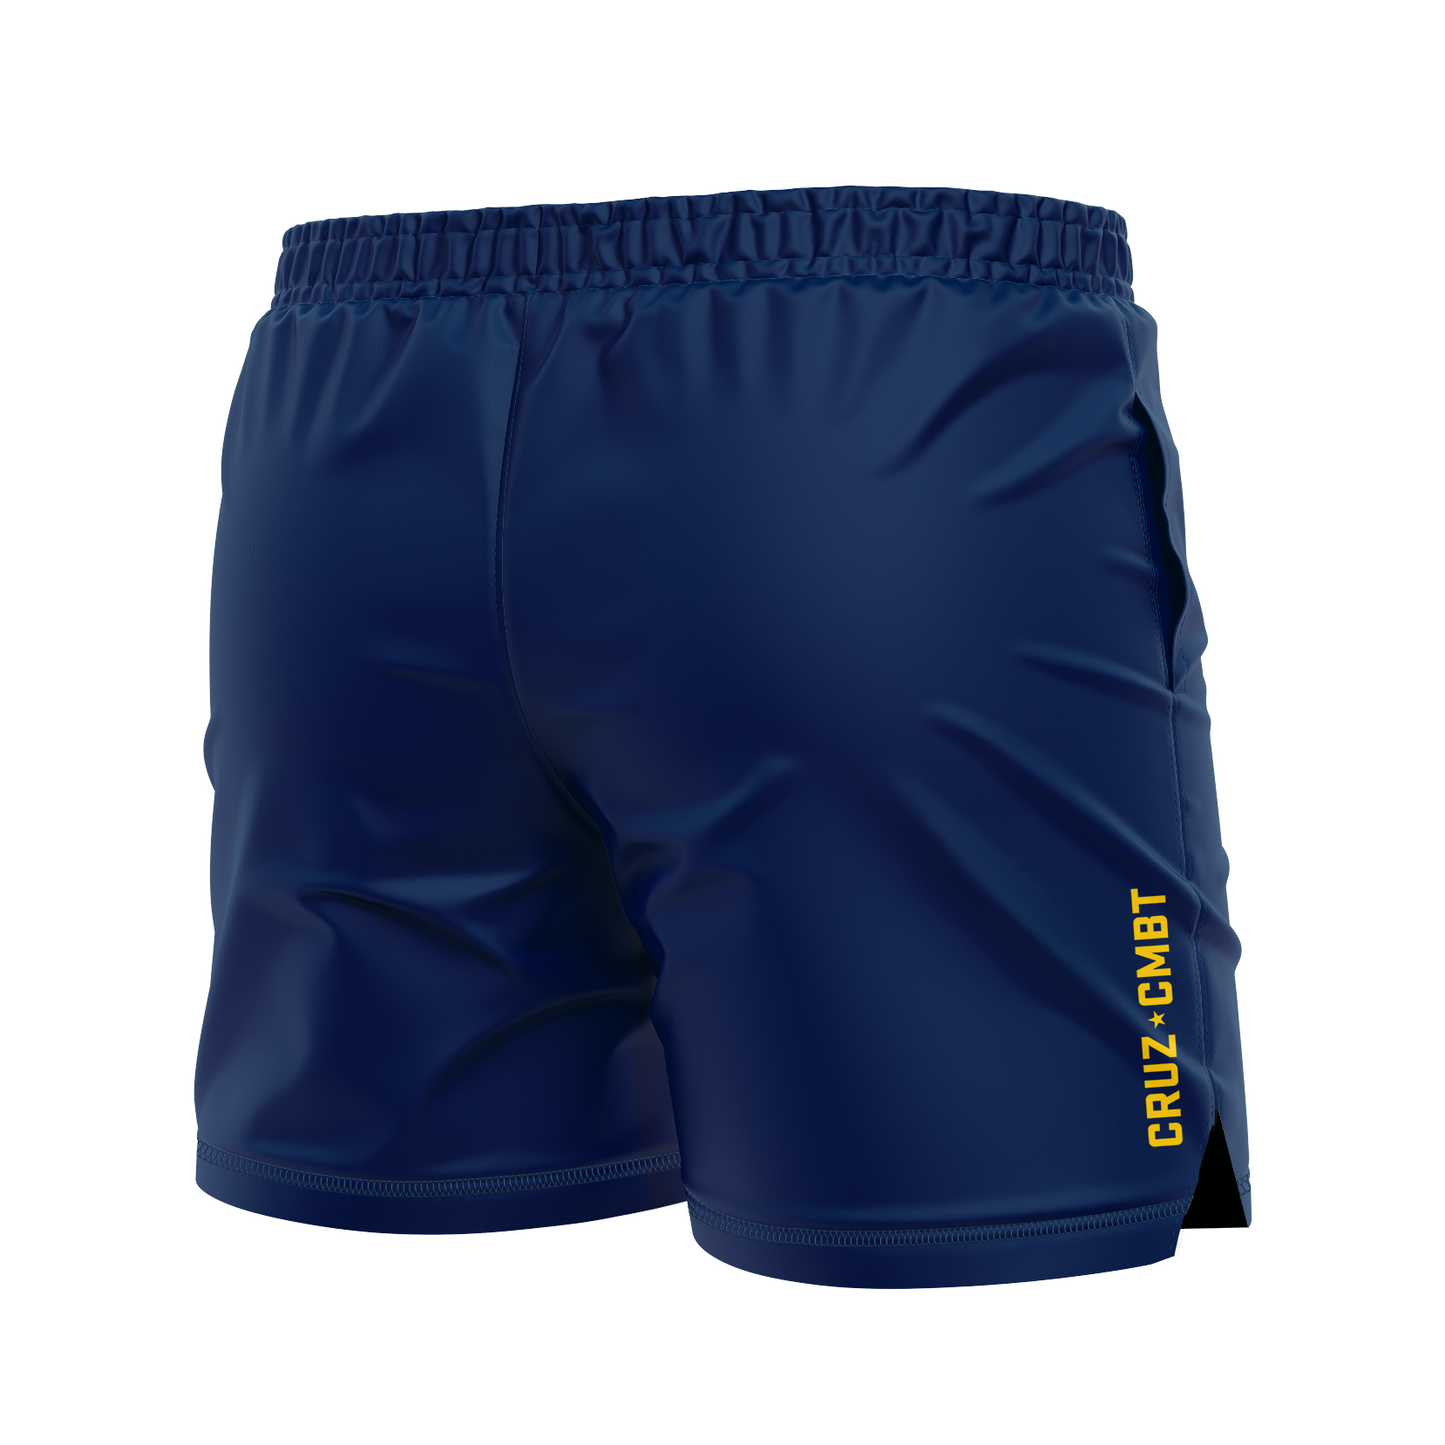 Base Collection men's FC shorts, light navy and athl. gold